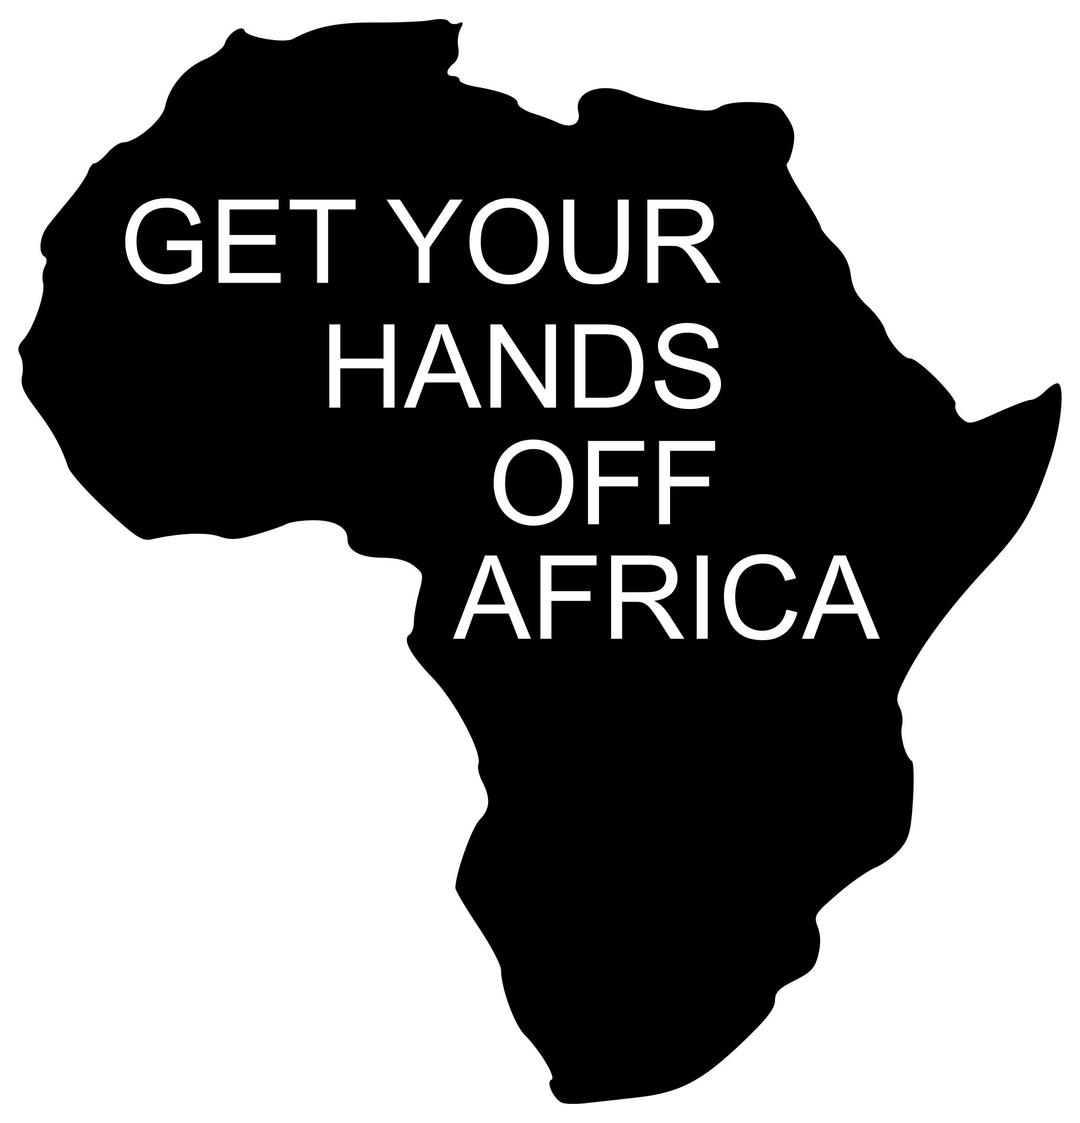 GET YOUR HANDS OFF AFRICA png transparent